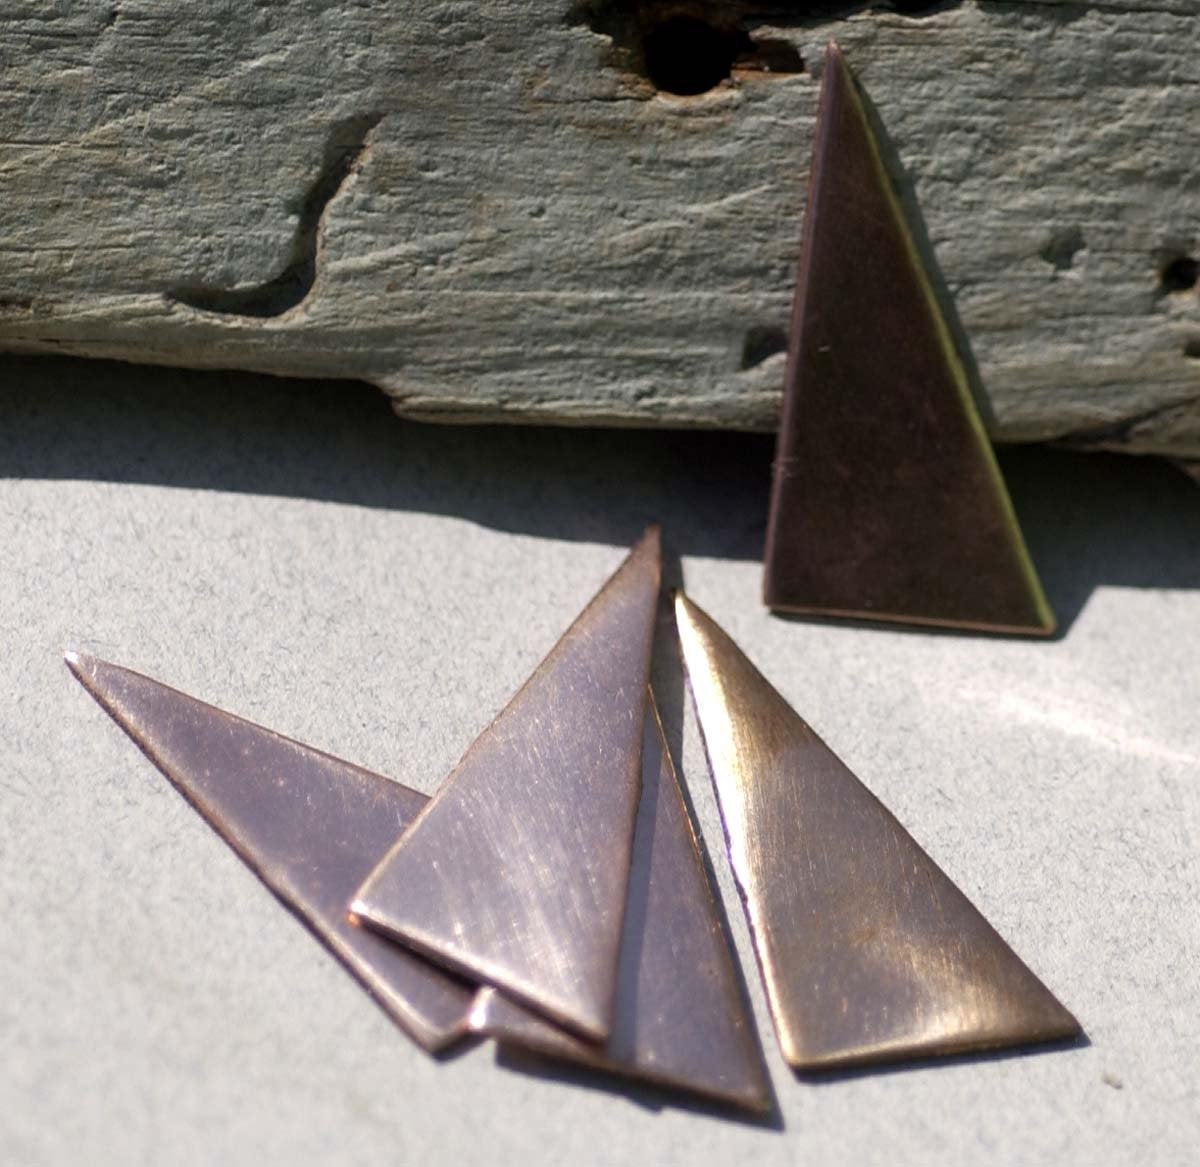 Geometric long Triangle shape 15mm x 30mm solid copper blanks for Enameling, raw brass, pure bronze, nickel silver, 24g 22g 20g